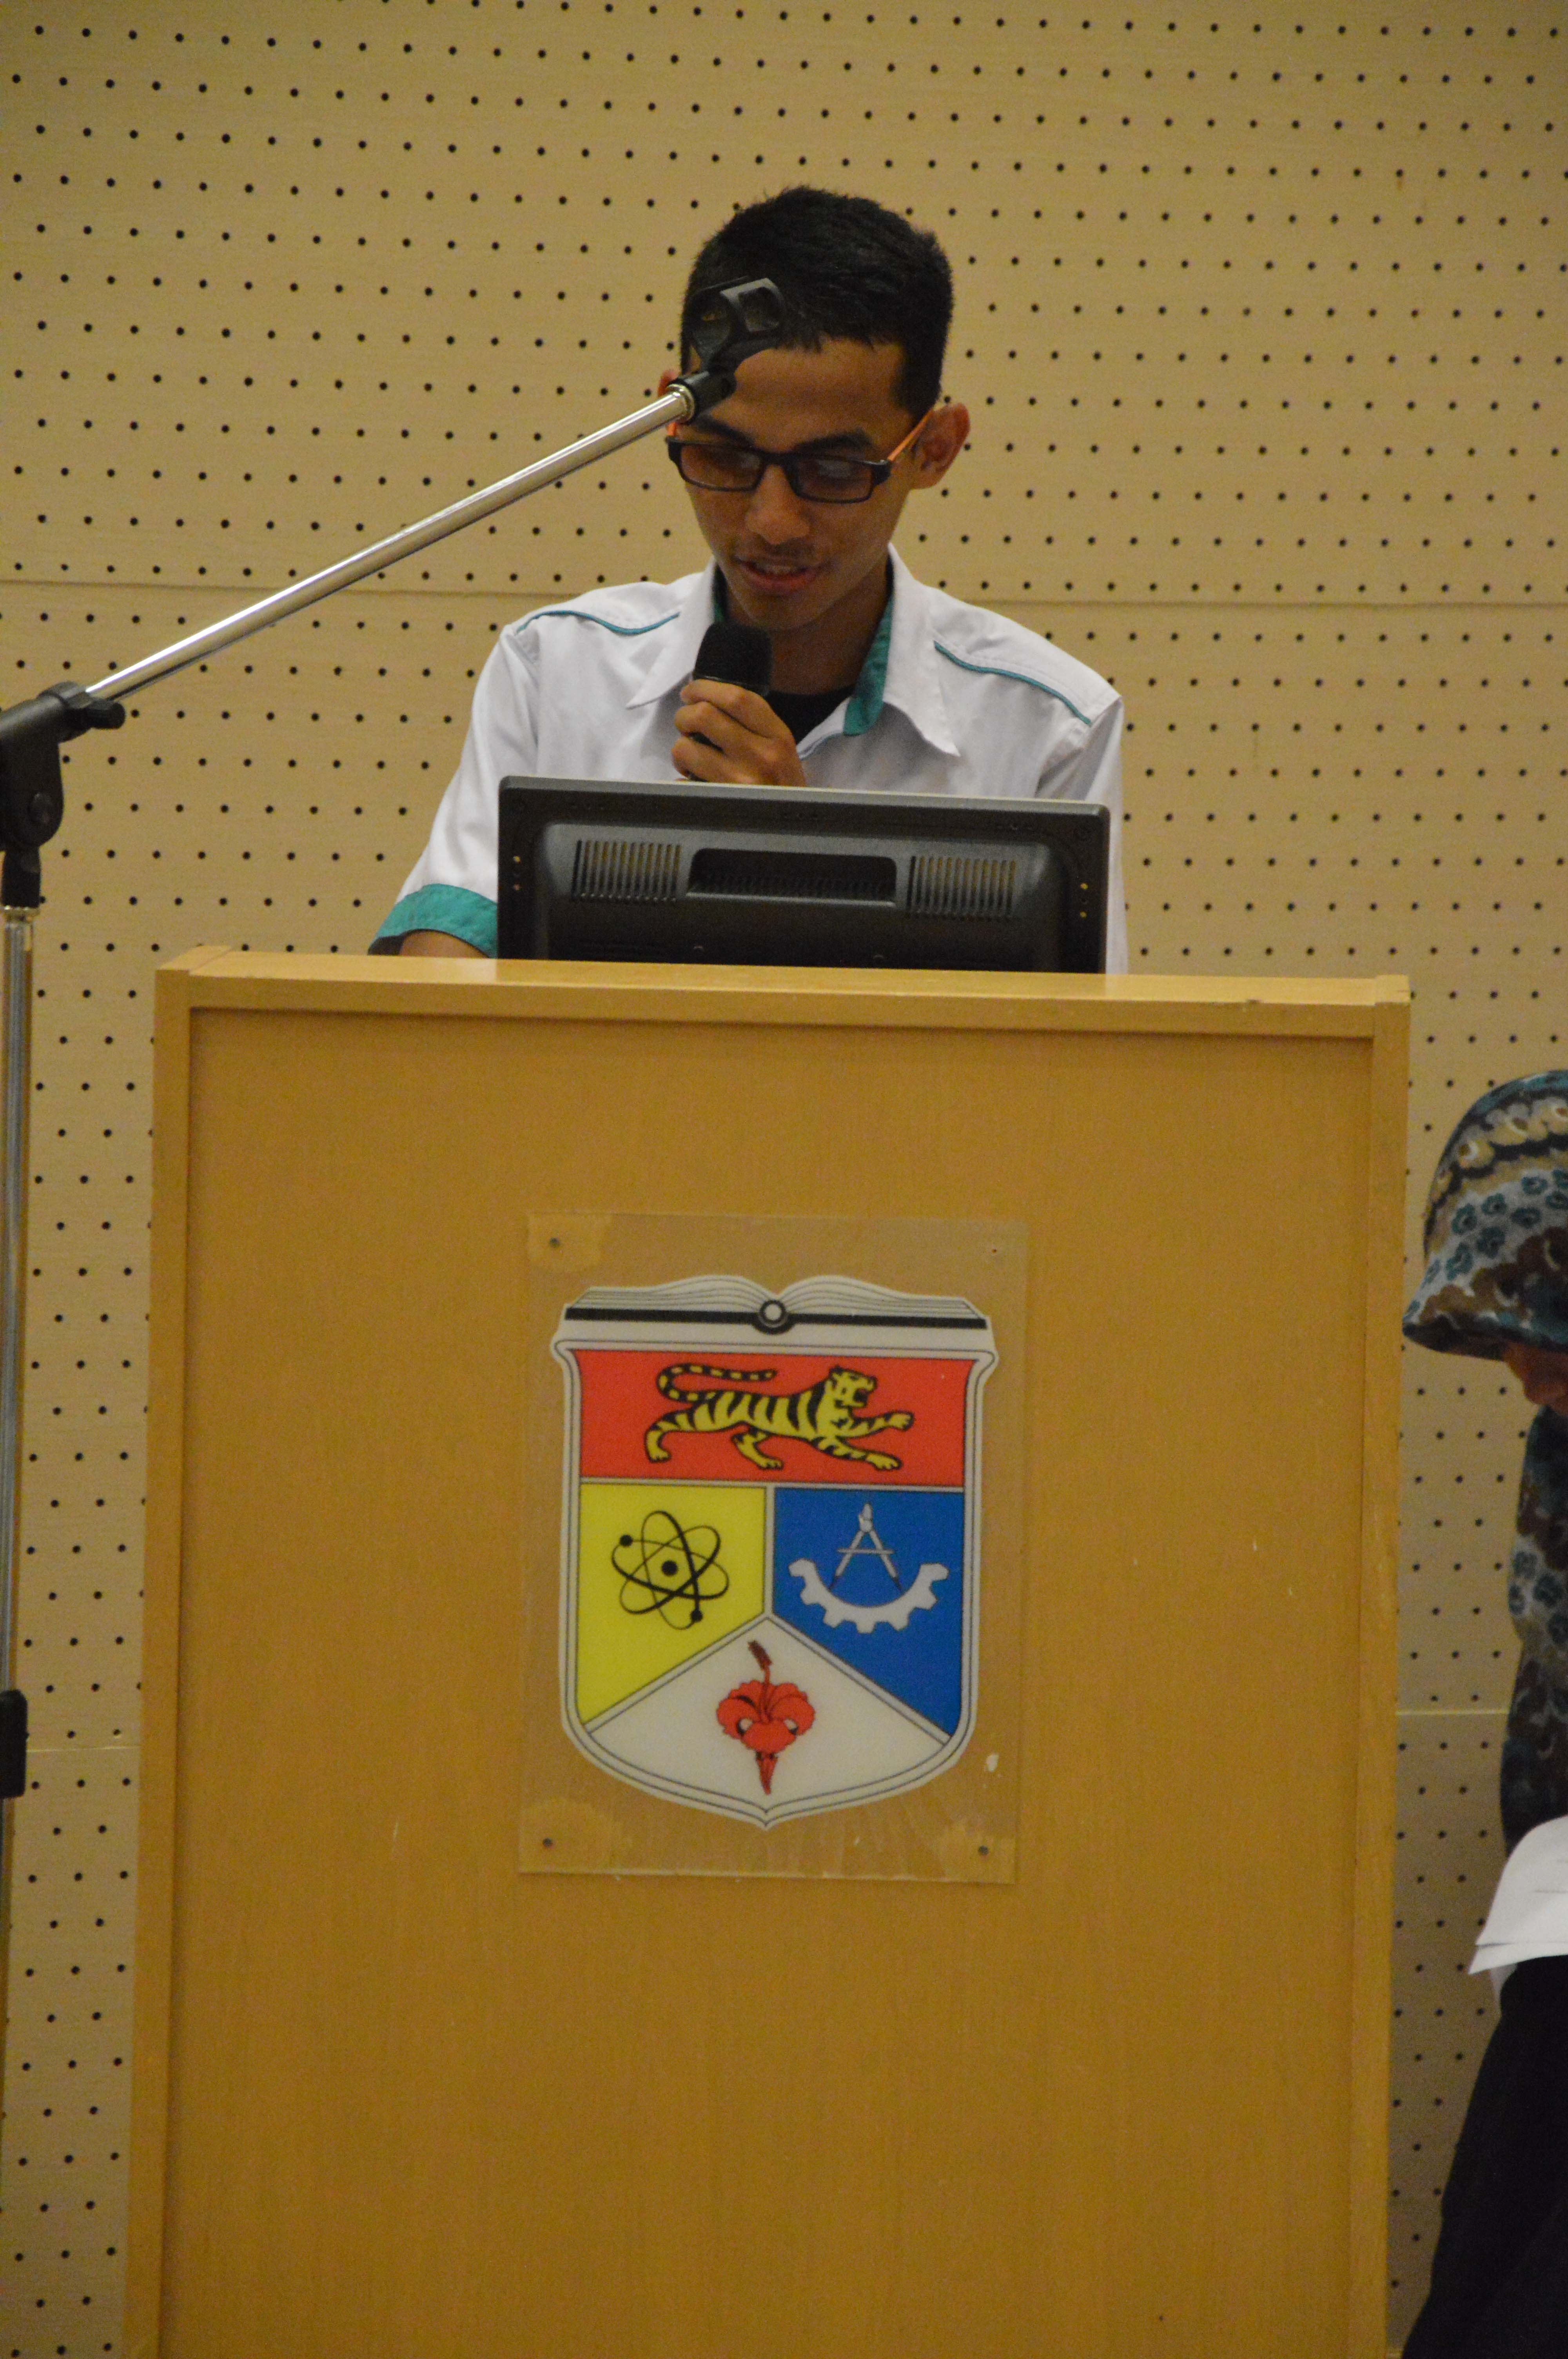 The President of PMFFAR 2013/2014, Mohamad Akmal bin Harun was invited to give a speech